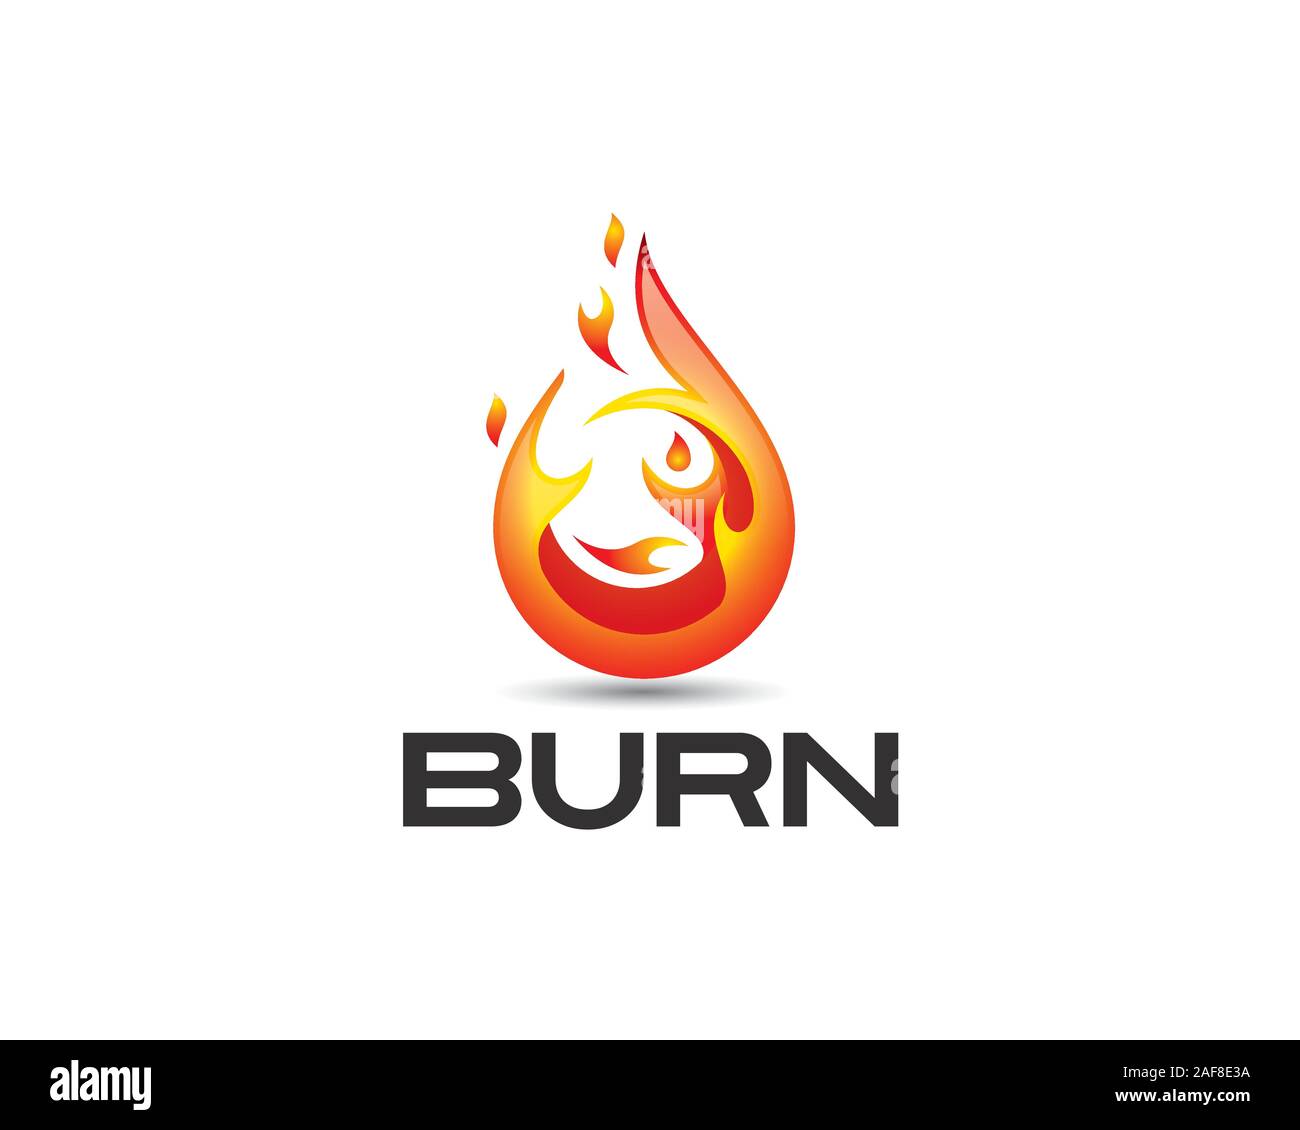 3D Glossy Fire icon and black Burn text Stock Vector